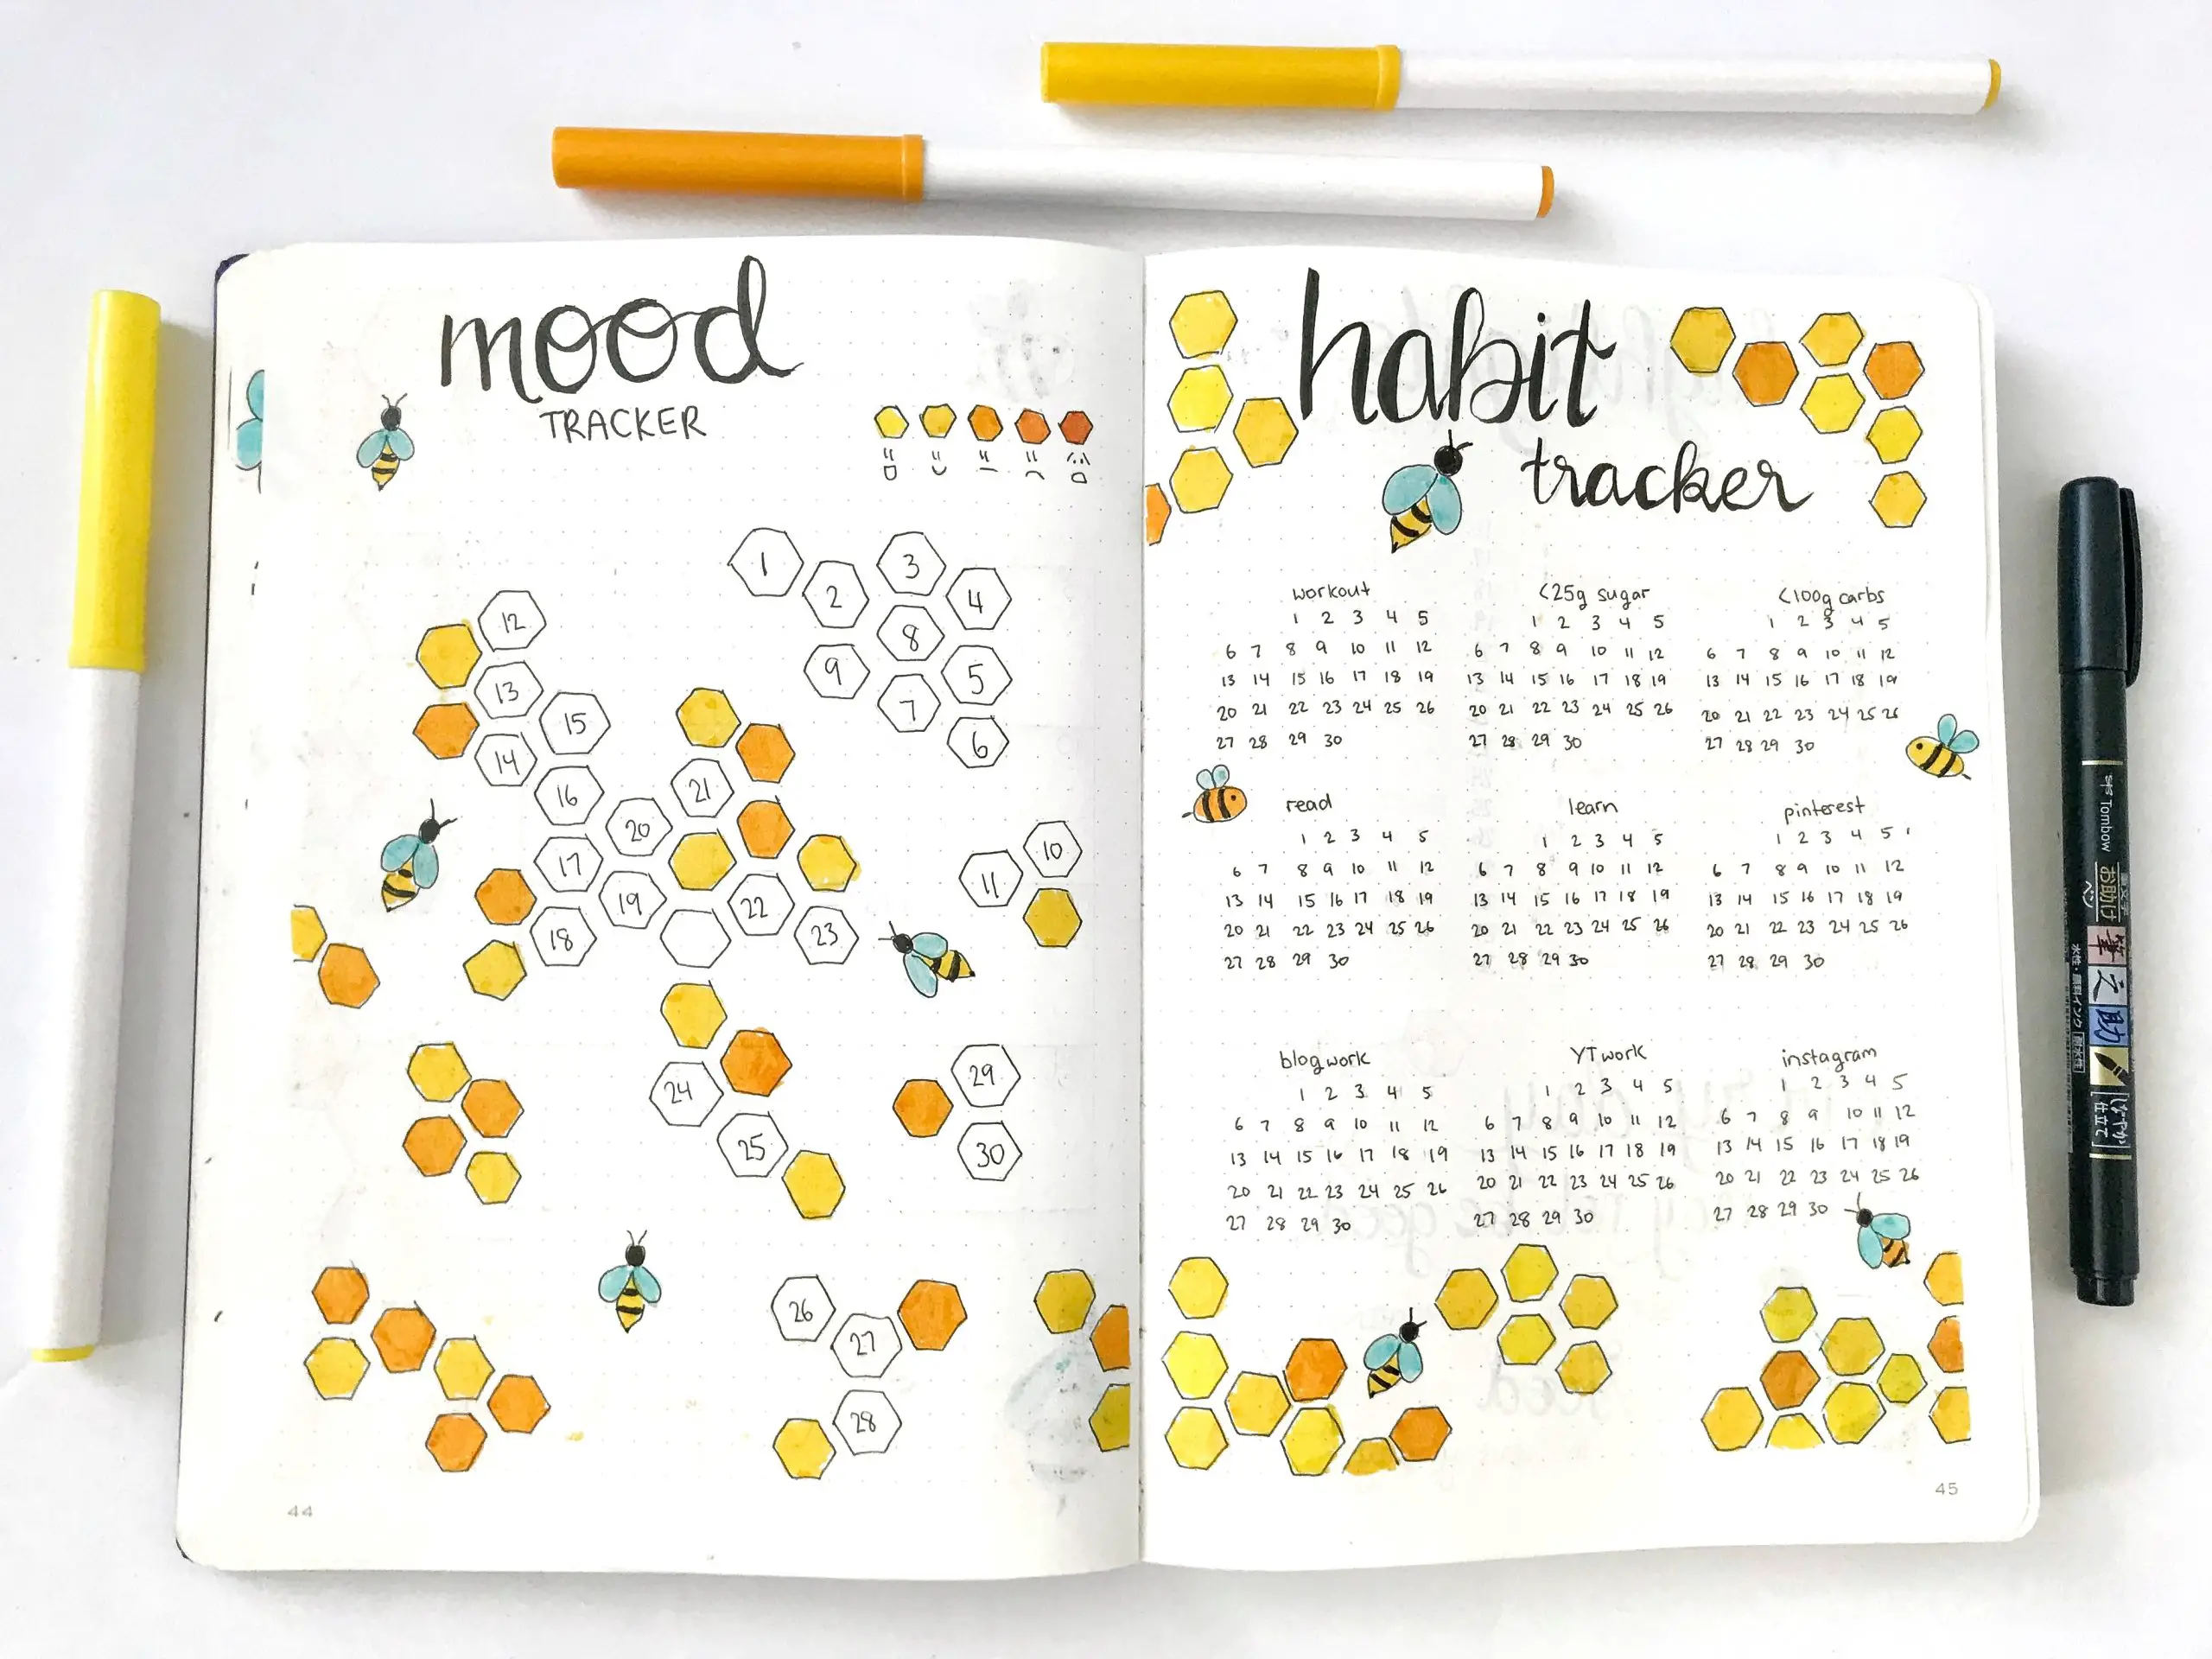 Bullet journal monthly mood tracker and habit tracker